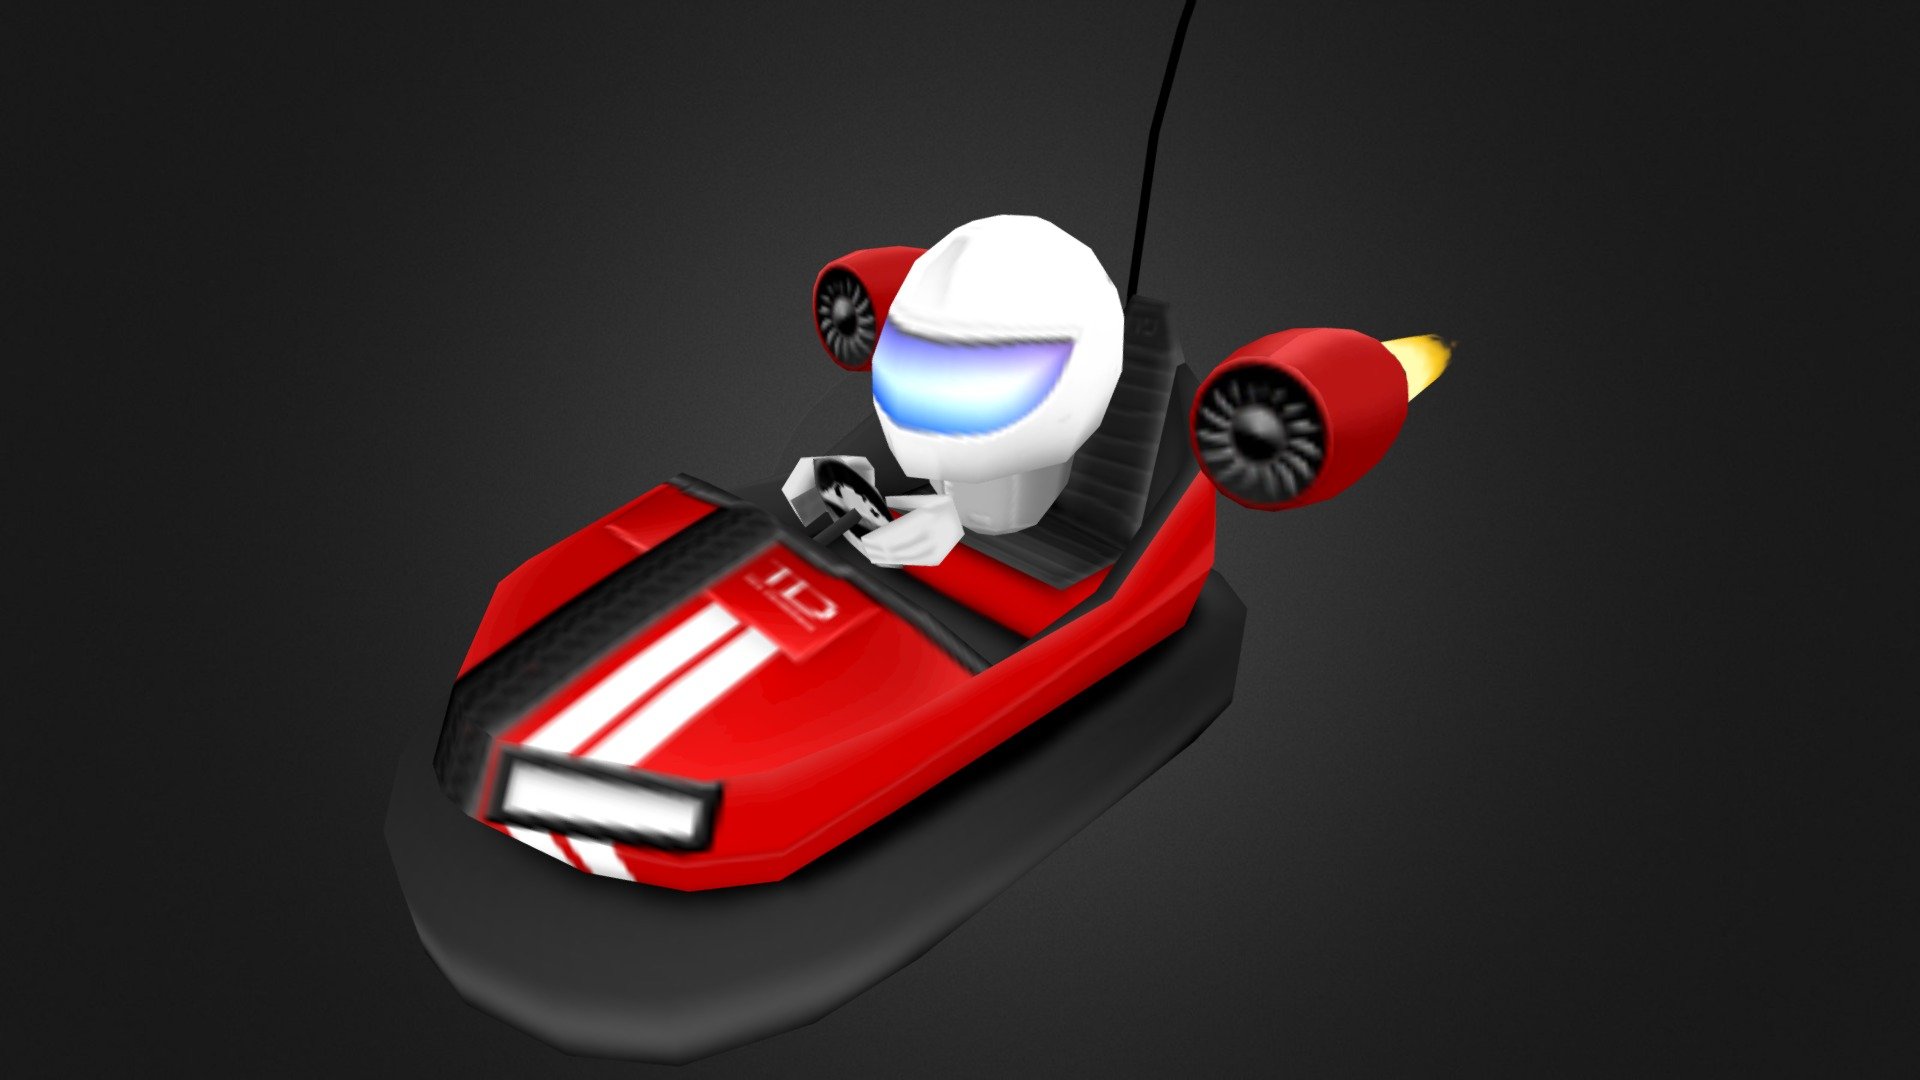 This is a model I made for a racing game called Bumper Madness 3d model